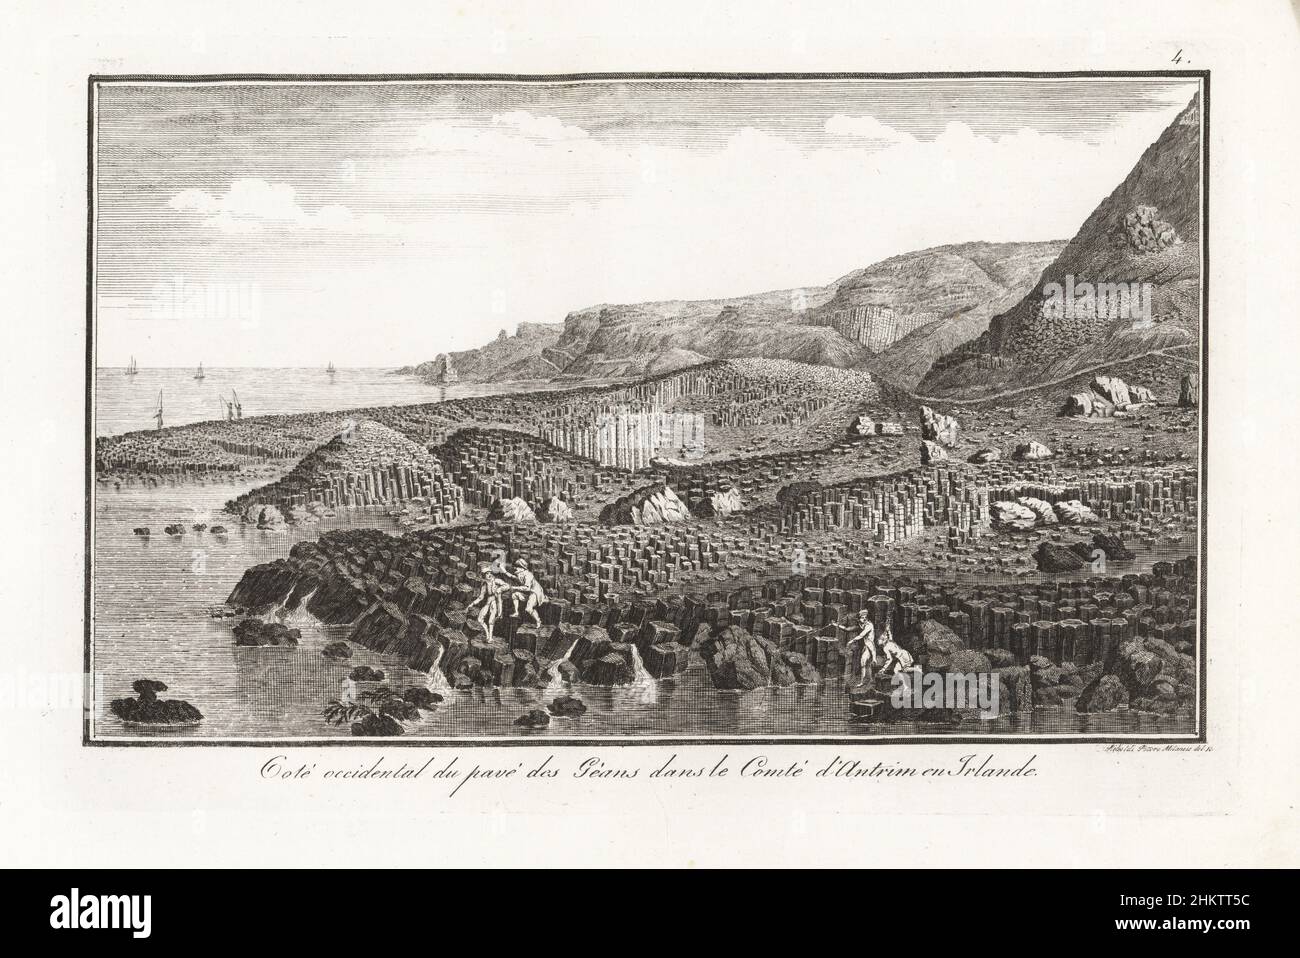 Geologists studying the western side of the Giant's Causeway, Antrim, Northern Ireland. Basalt columns from an ancient volcanic fissure eruption. Cote occidental du pave des Geans dans le Conte d'Antrim en Irlande. Copperplate engraving by Gaetano Riboldi from Scipion Breislak’s Traite sur la Structure Exterieure du Globe, Treatise on the Exterior Structure of the Globe, Jean-Pierre Giegler, Milan, 1822. Stock Photo